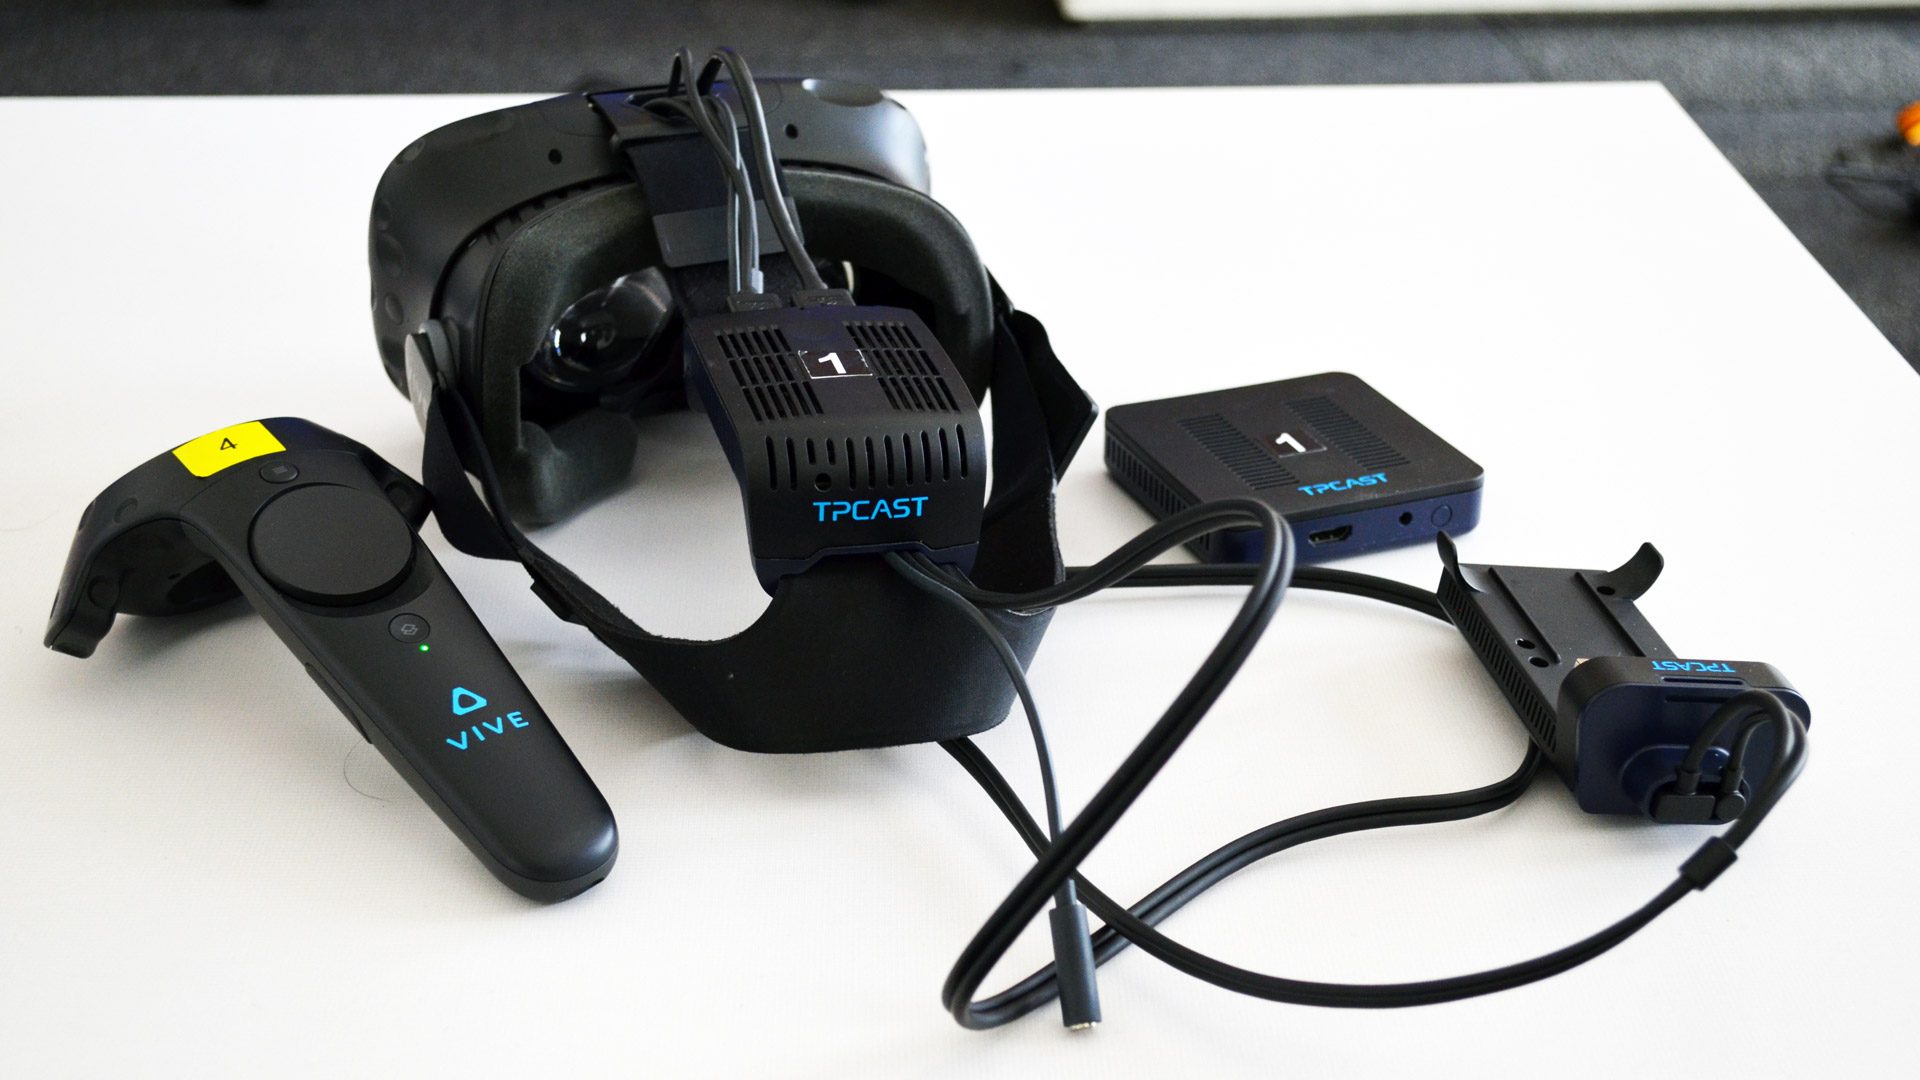 TPCAST Launches Business Edition Wireless VR Adapter, Up to 4